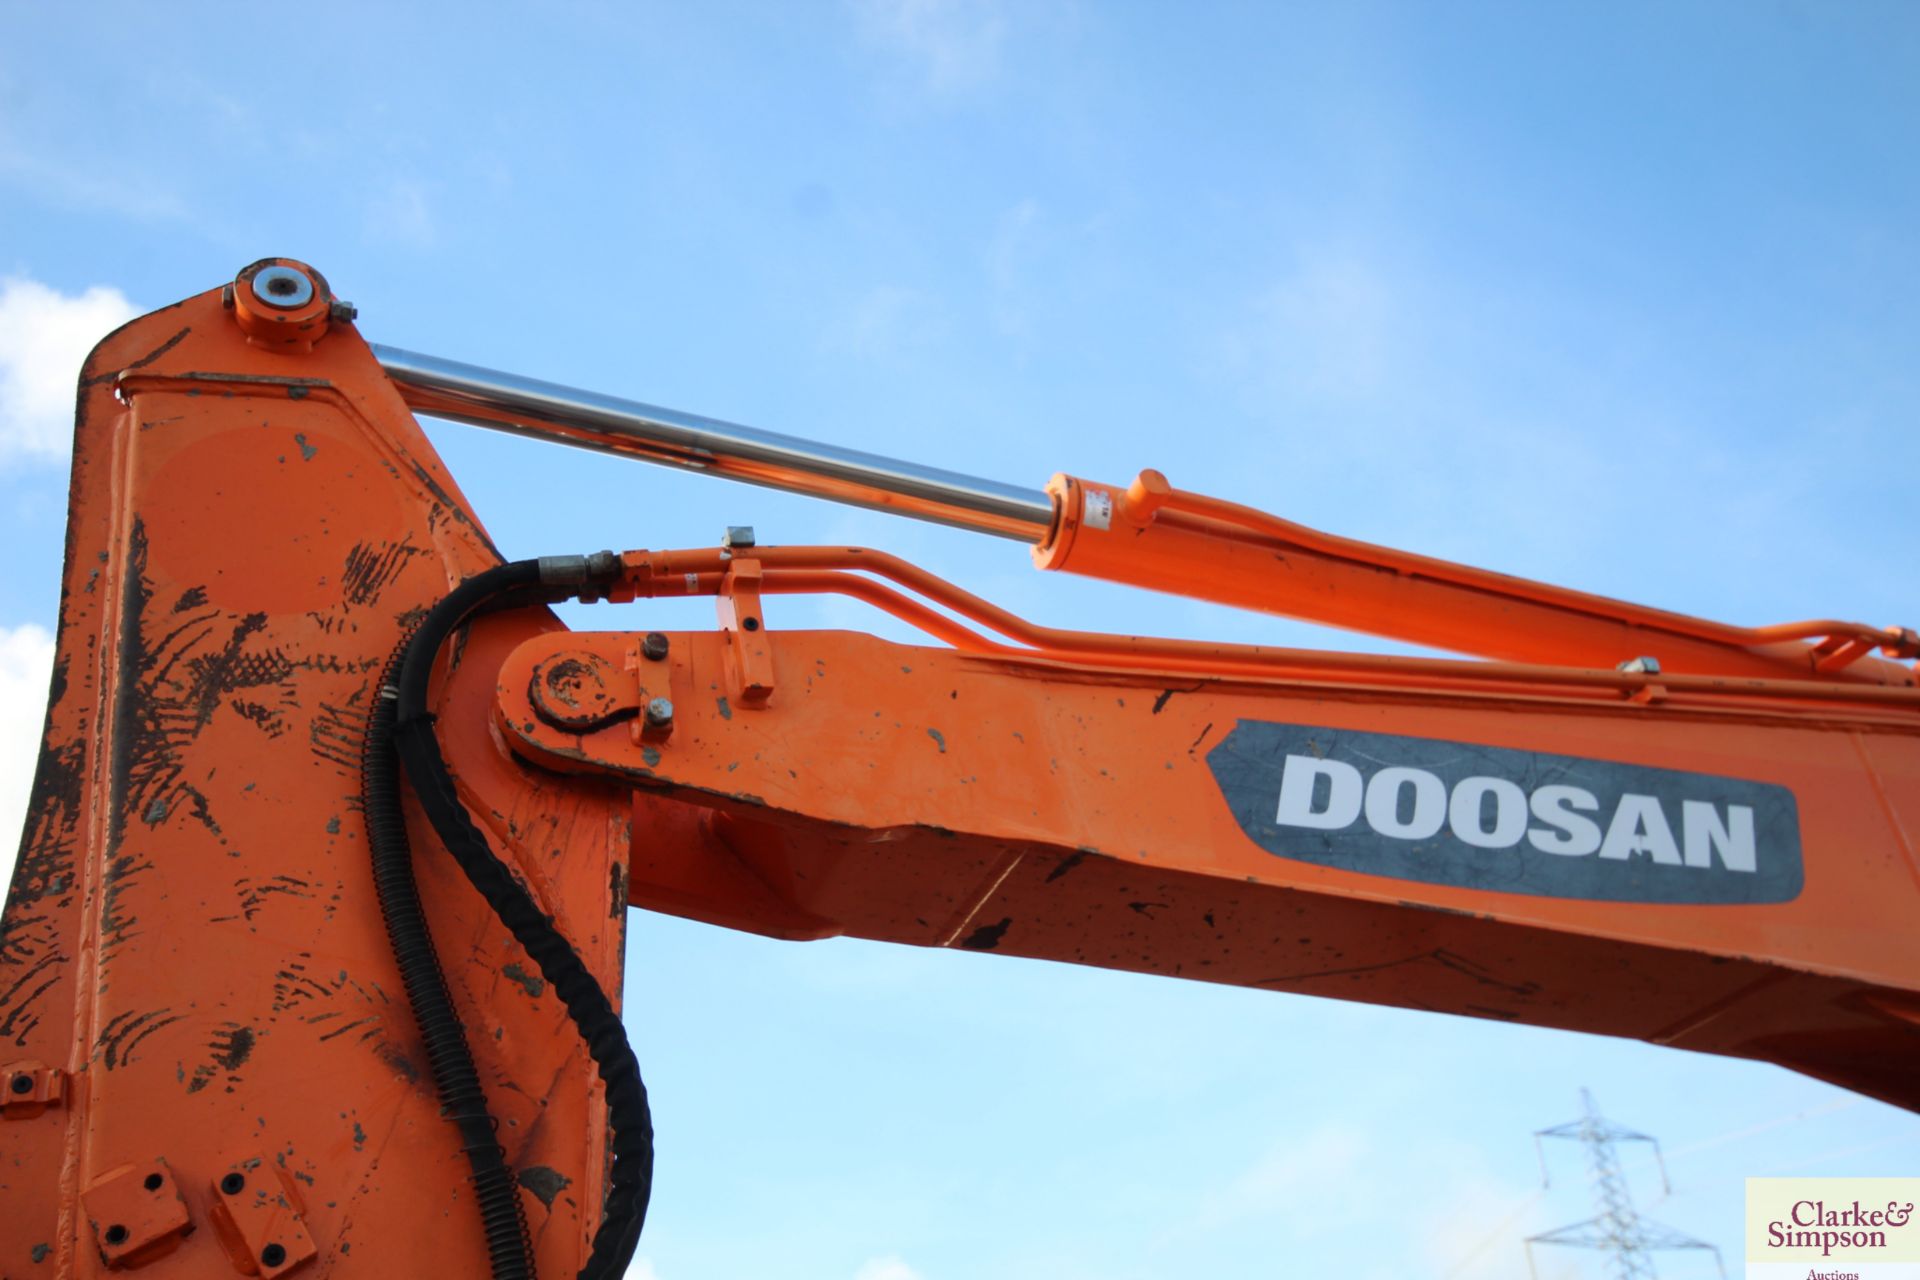 Doosan DX55E 5.5T excavator. 2011. 5,045 hours. Serial number 50461. With new rubber tracks 50 hours - Image 11 of 68